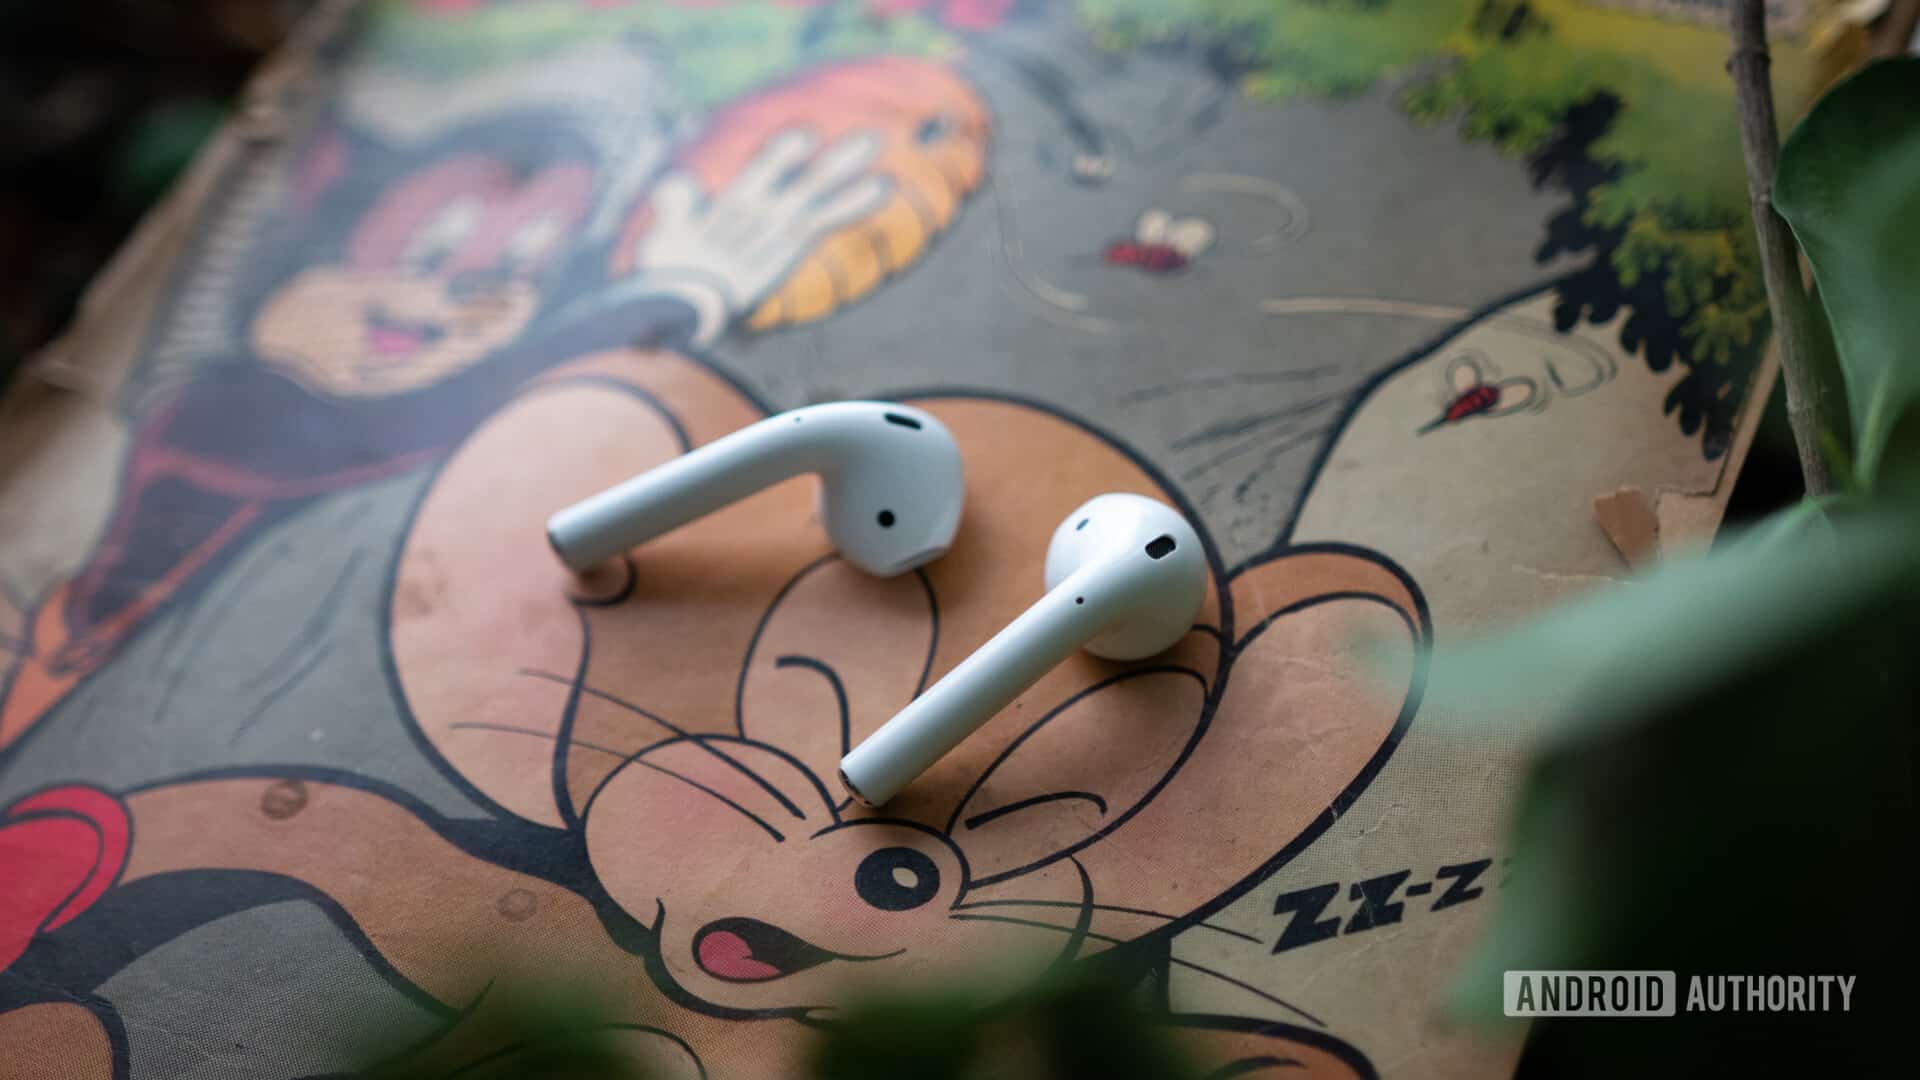 Find lost AirPods